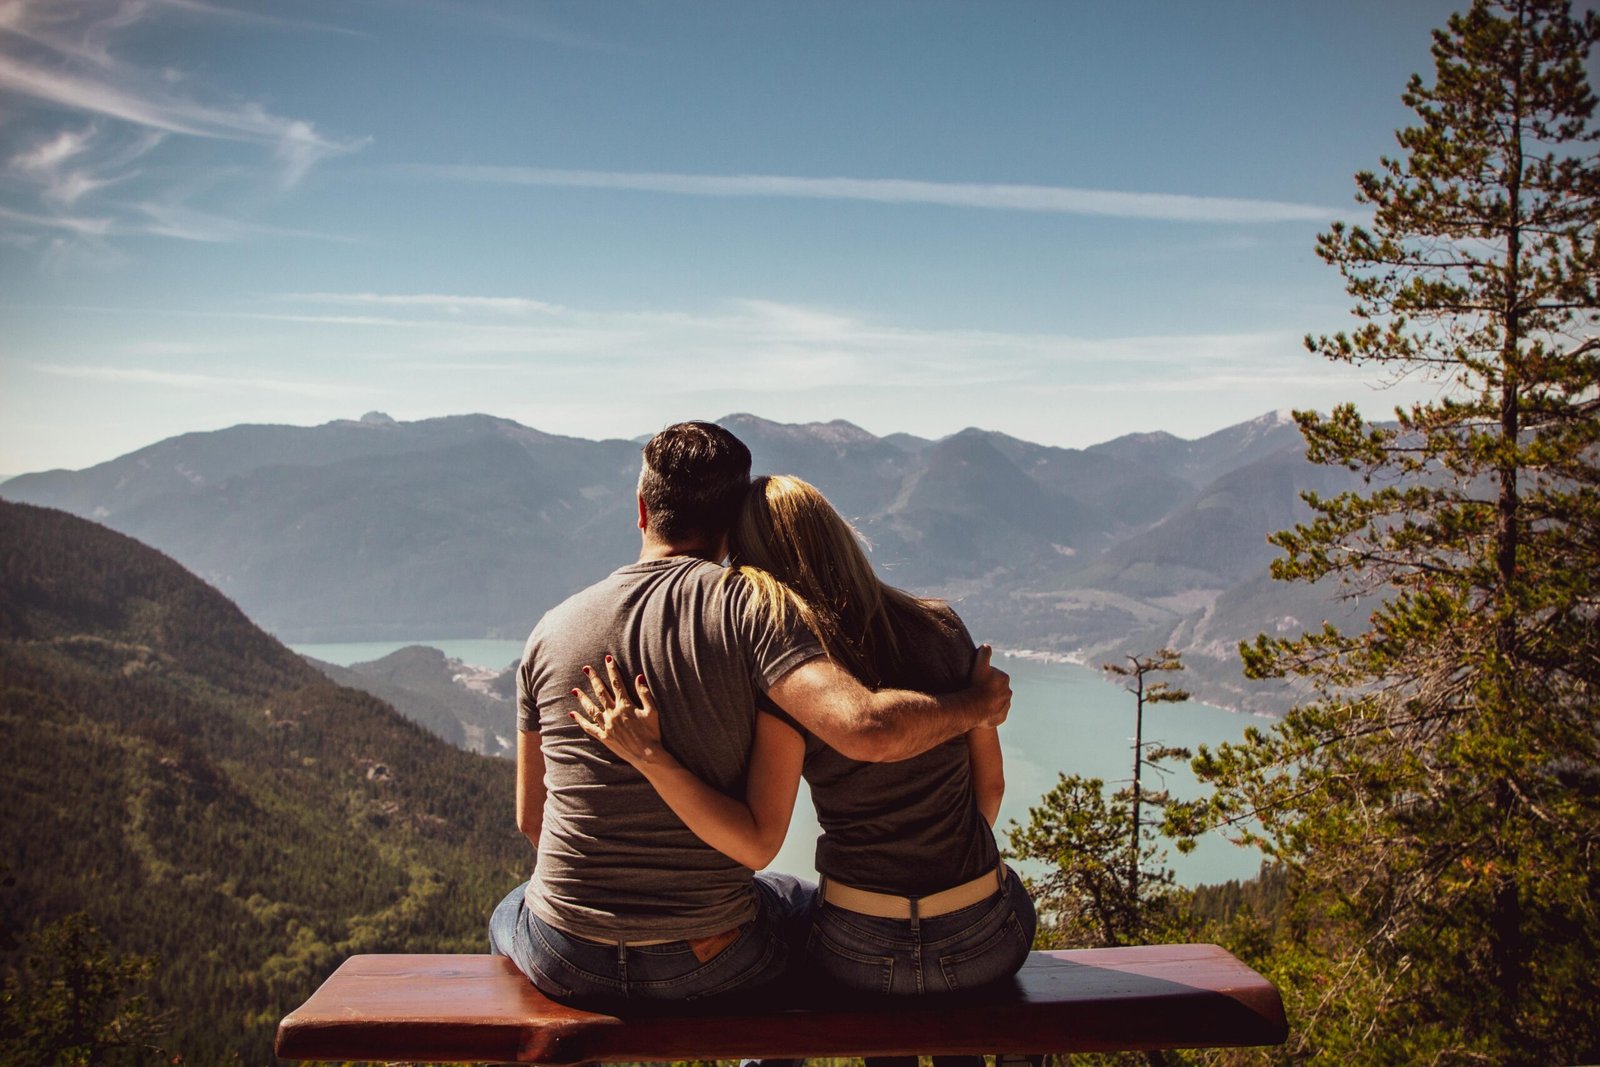 20 Best Romantic and Fun Date Ideas to Make Your Date Memorable